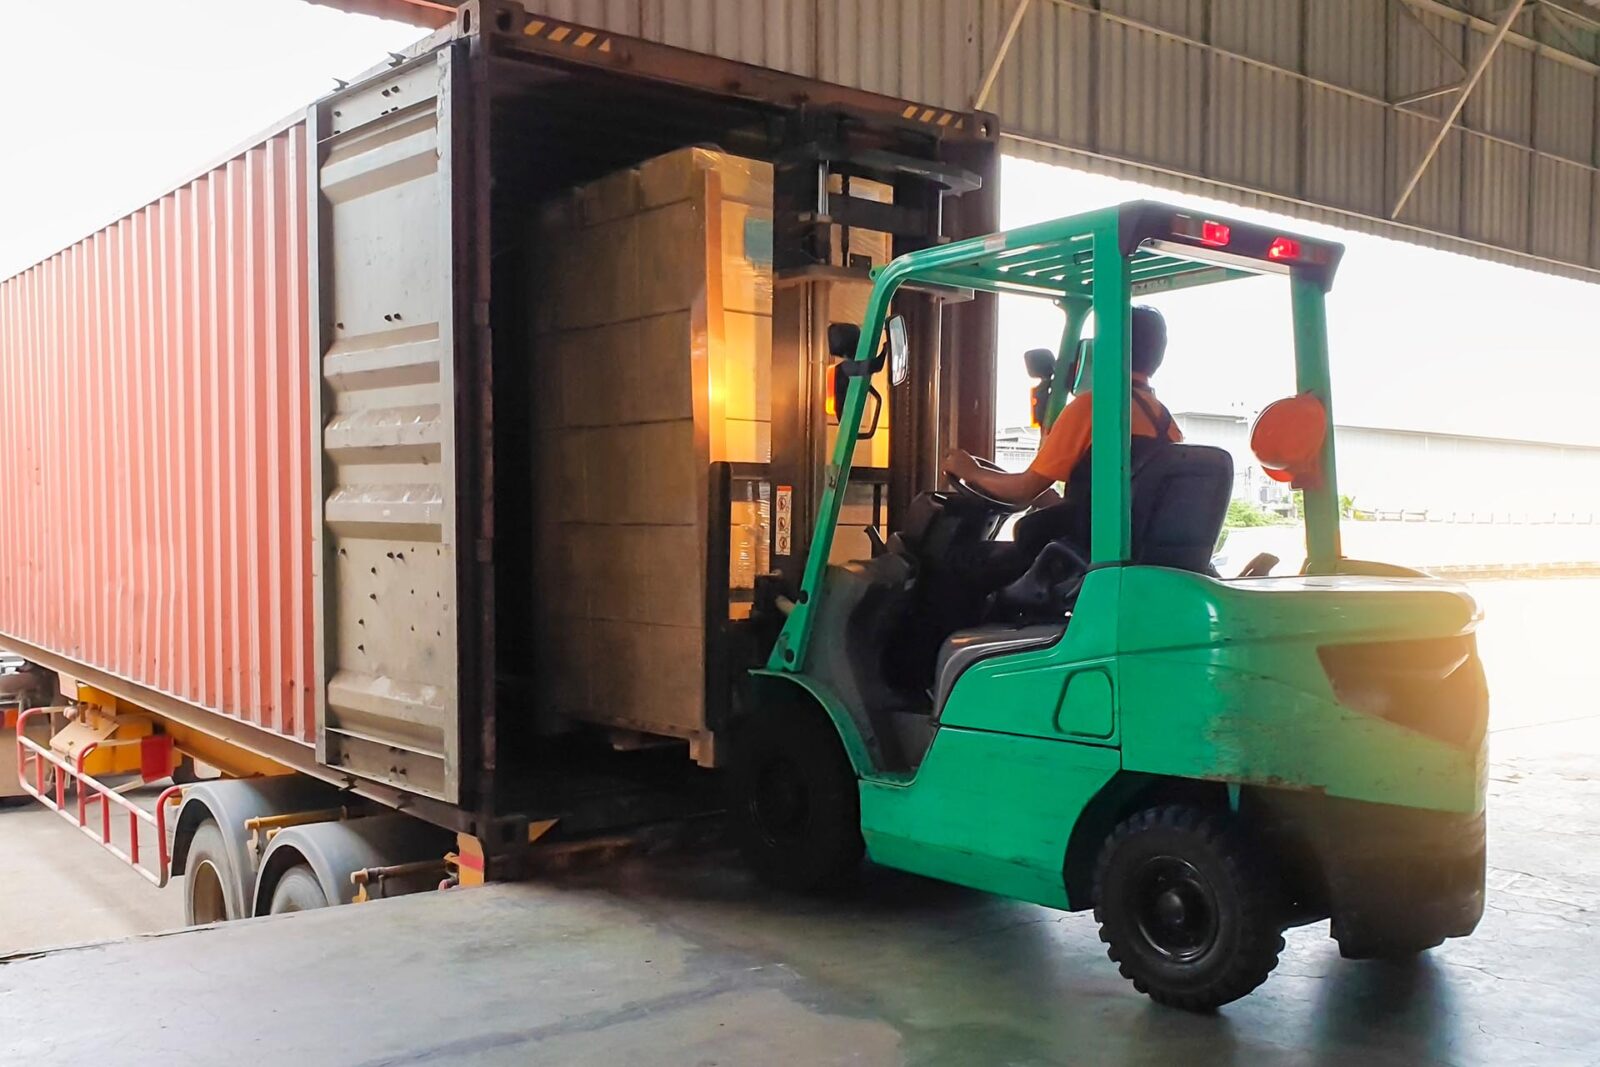 Forklift,Tractor,Loading,Package,Boxes,Into,Shipping,Container,At,Dock